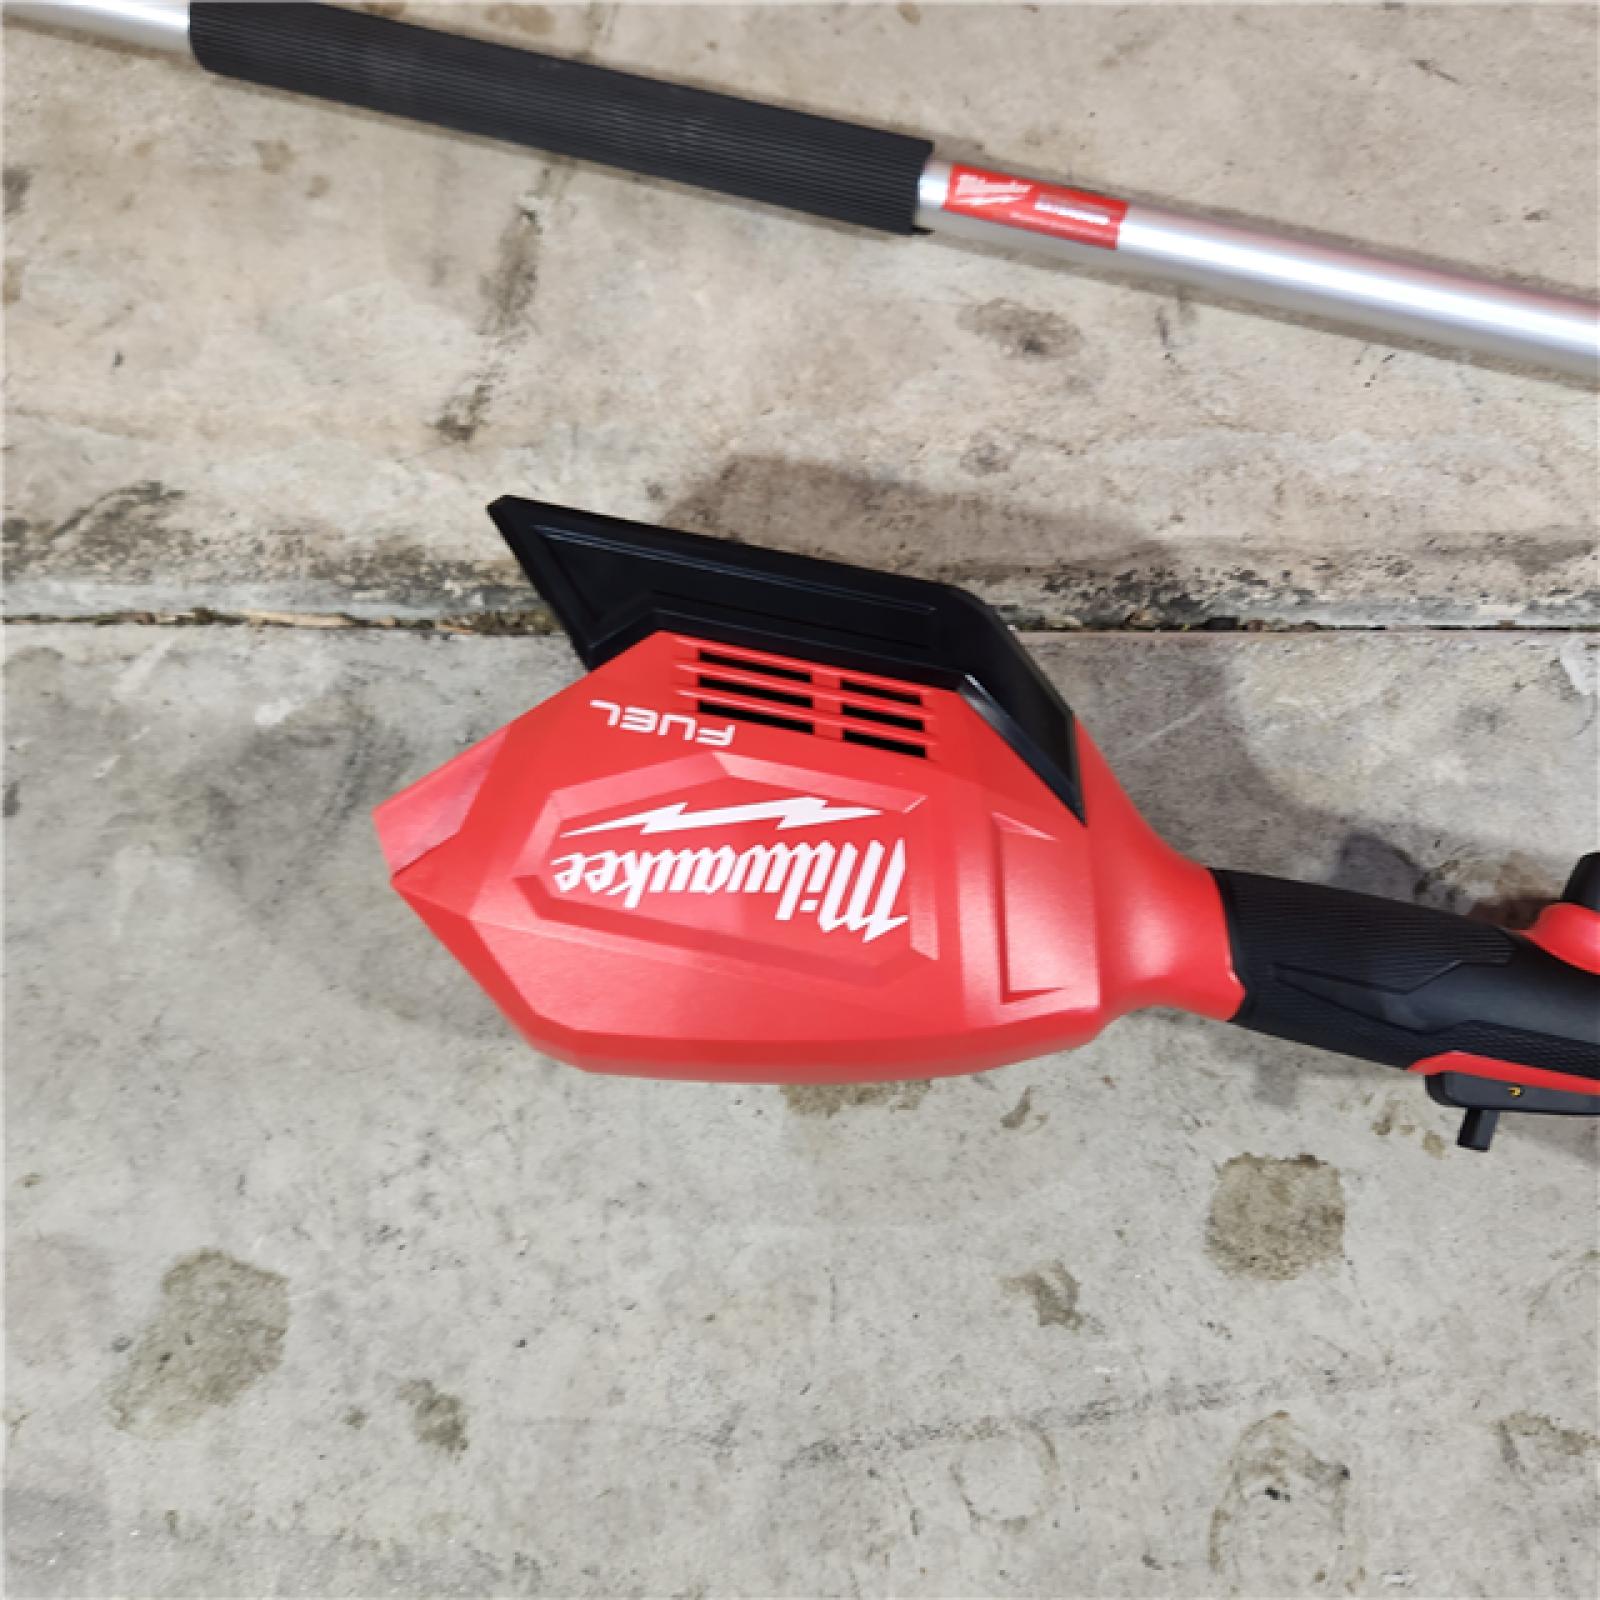 Houston location- AS-IS Milwaukee M18 FUEL 10 Pole Saw with QUIK-LOK TOOL-ONLY